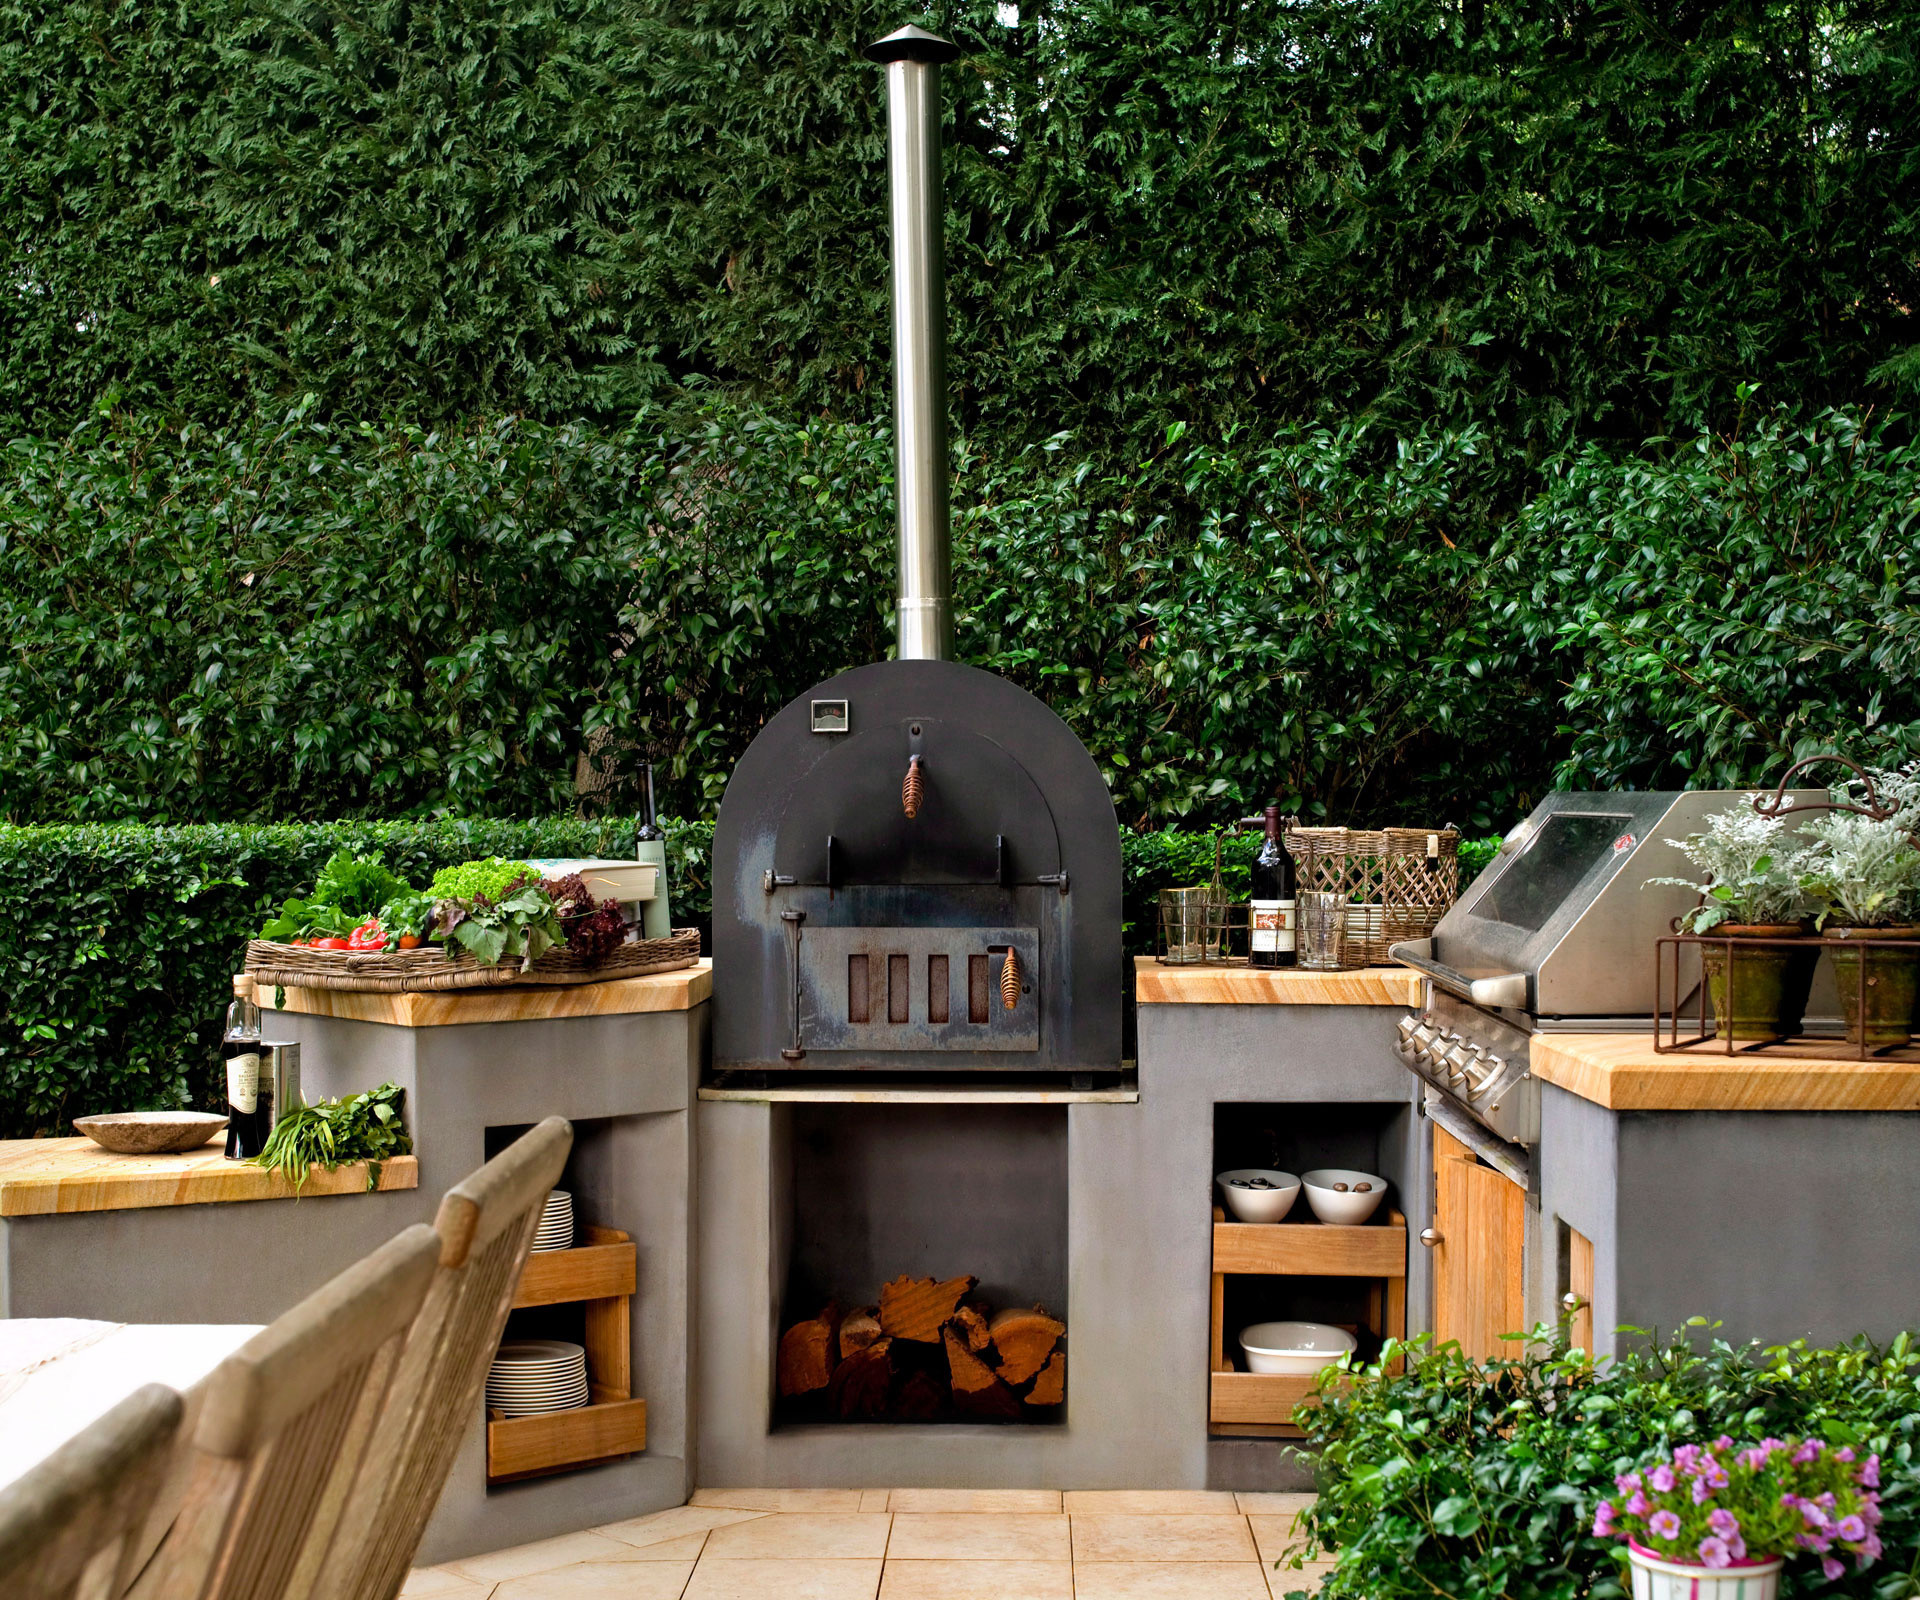 Build Your Own Outdoor Kitchens
 How to create your own outdoor kitchen